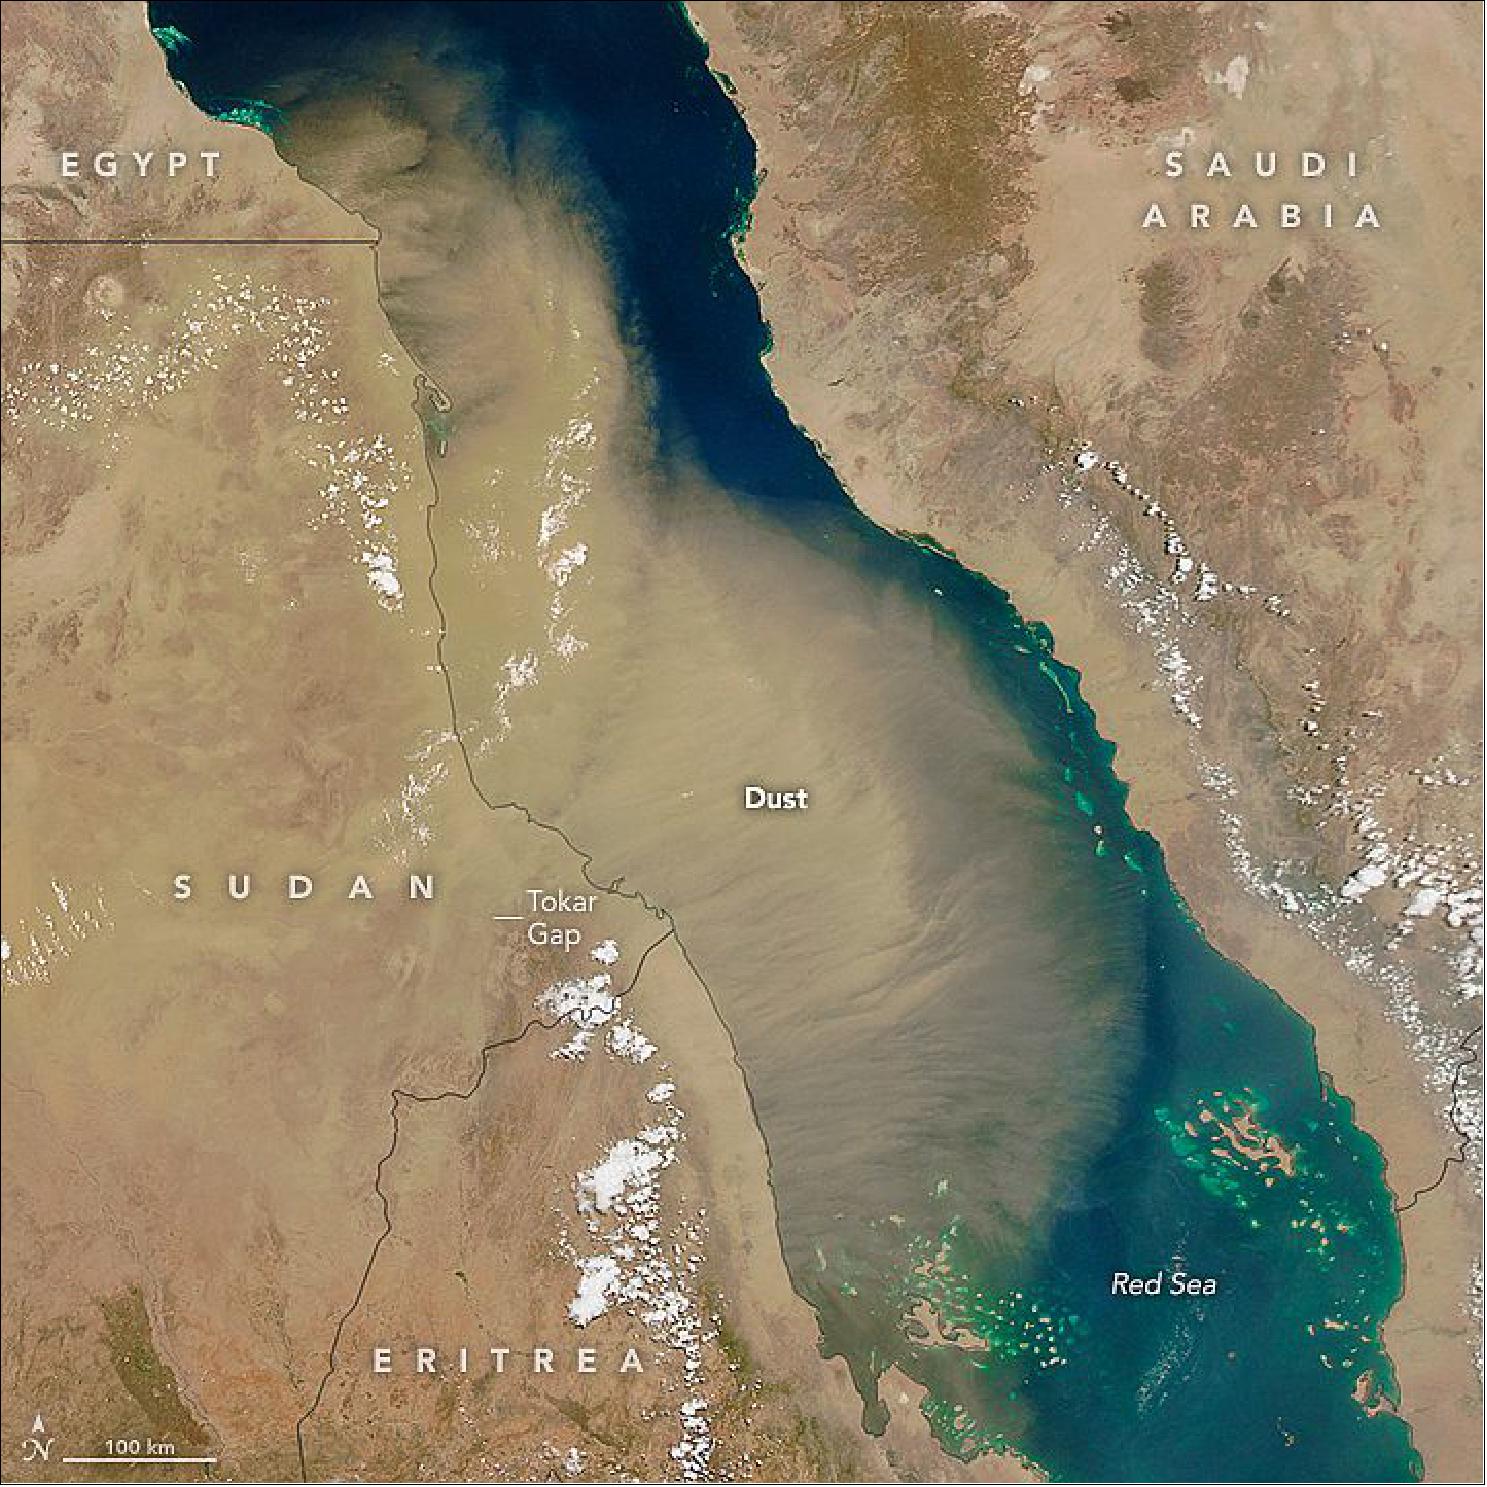 Figure 120: The MODIS instrument of NASA's Aqua satellite acquired this dust storm over the Red Sea on June 15, 2016 at 11:05 UTC (image credit: NASA Earth Observatory, image by Jeff Schmaltz)